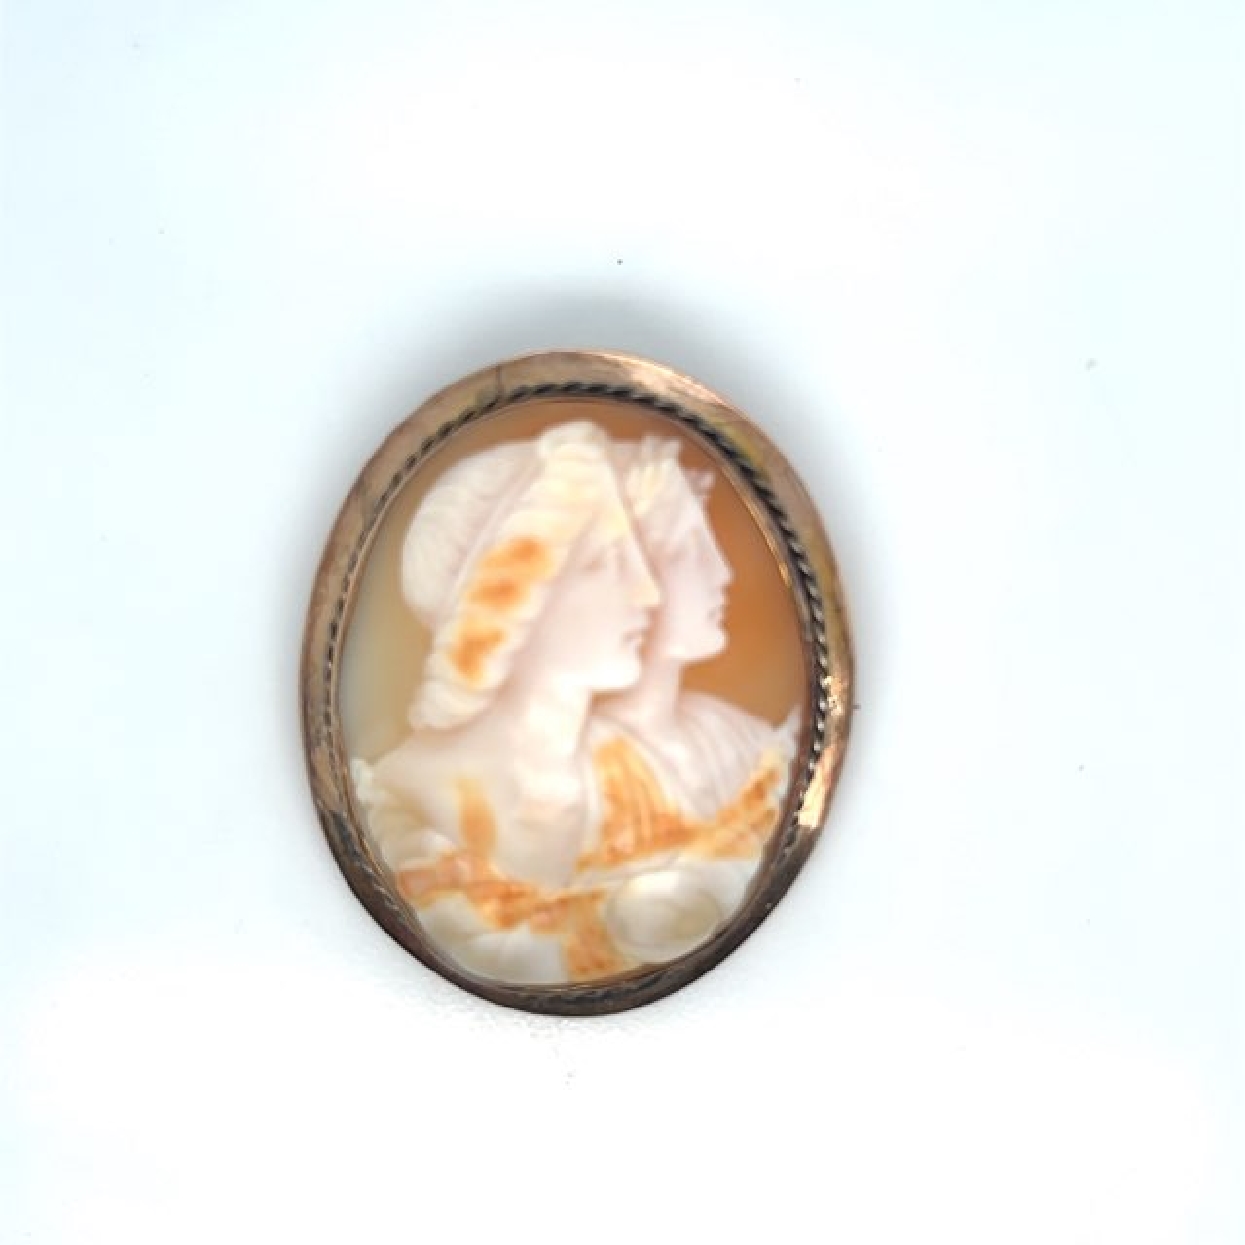 10K Yellow Gold Shell Cameo with Two Portraits
*Comes with Appraisal